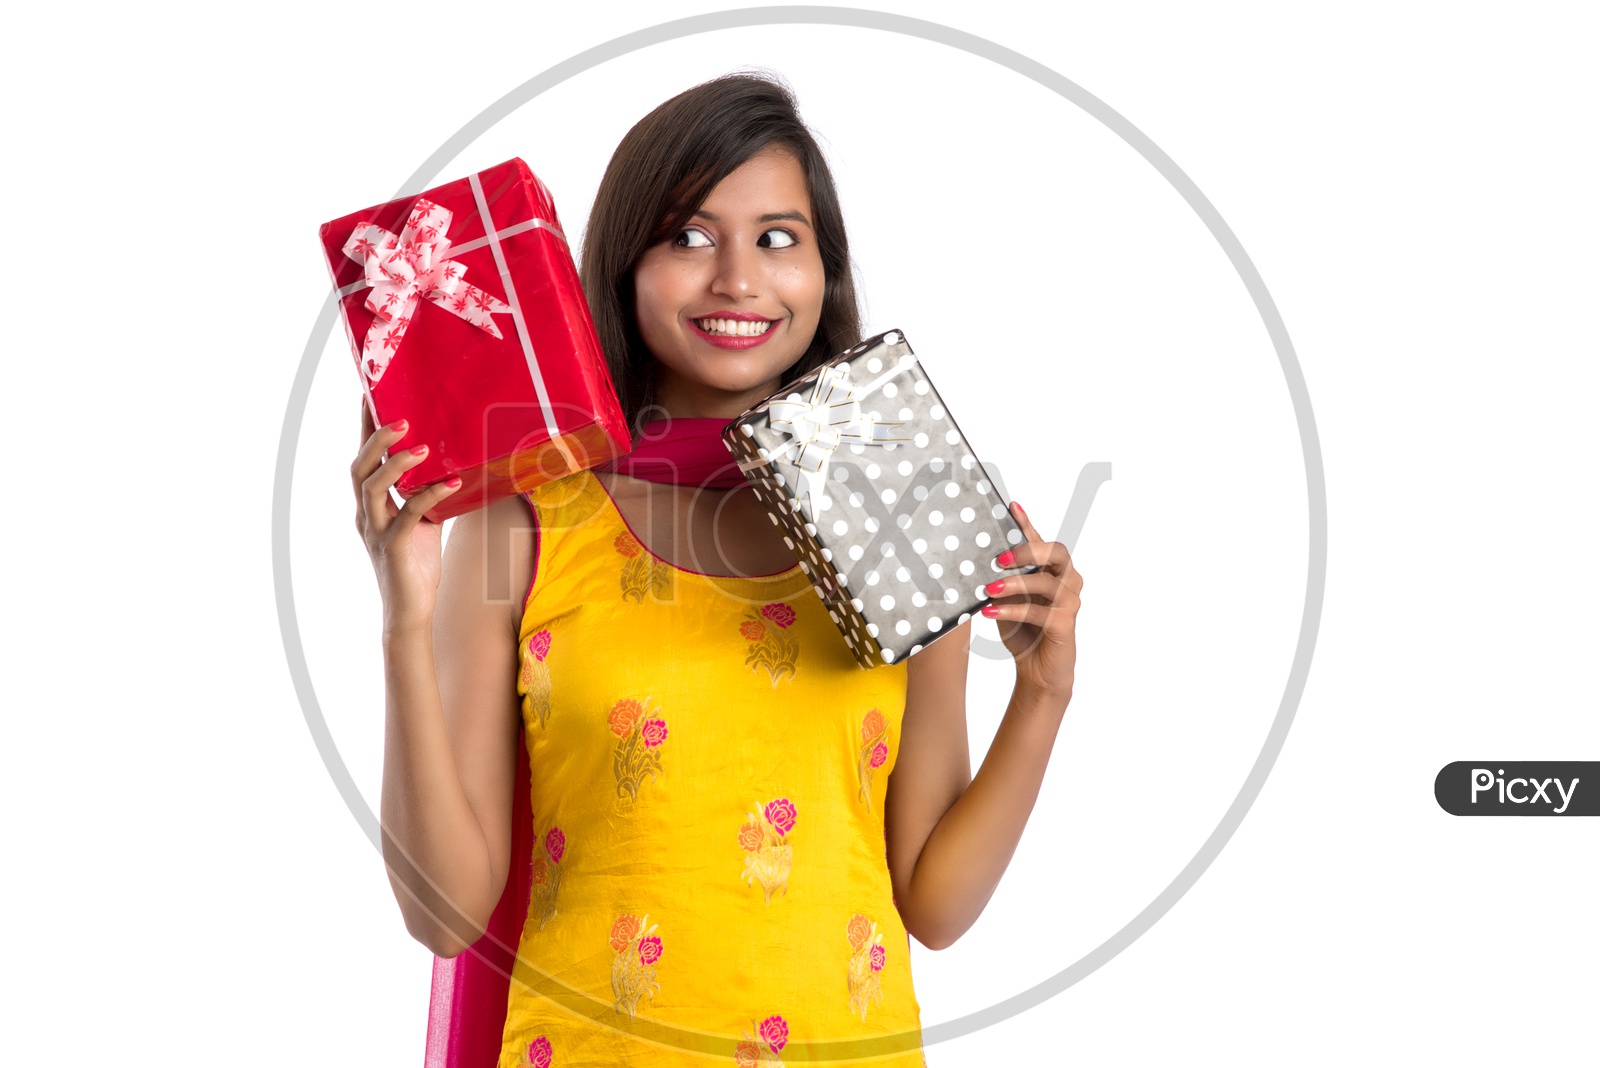 Beautiful Indian Girl With Gifts In Hand with a Smile Face